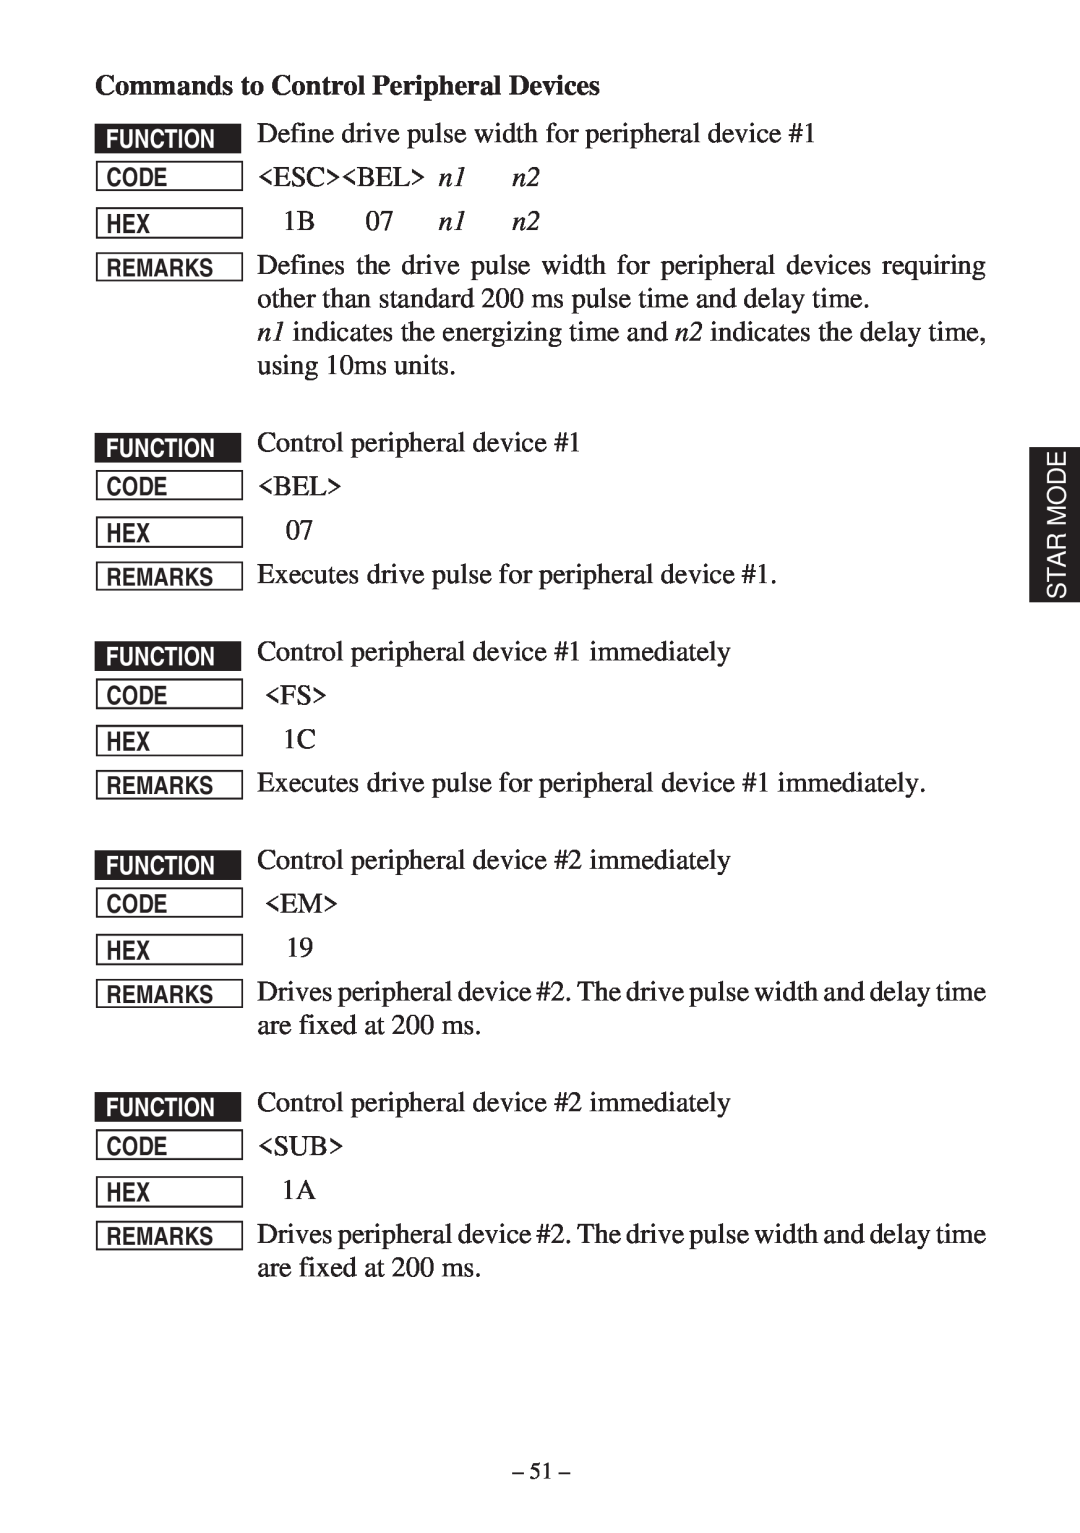 Star Micronics RS232 manual Commands to Control Peripheral Devices 